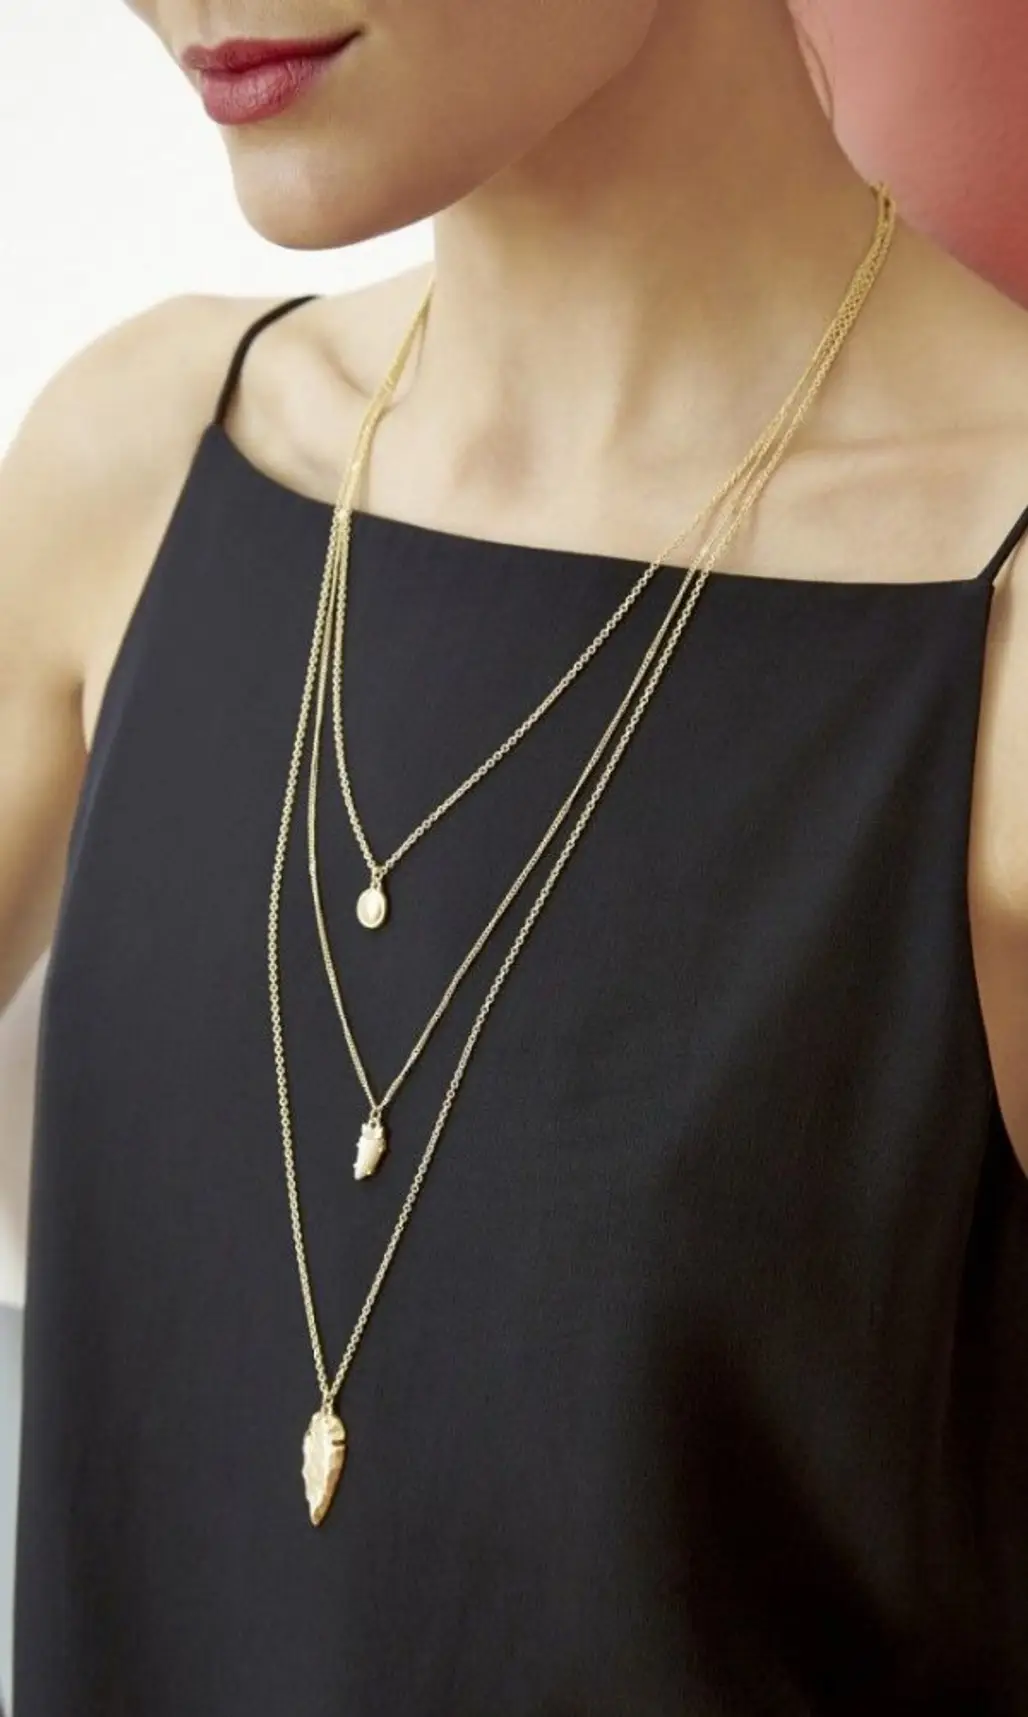 A Three Tiered Necklace Glams up a Simple Top